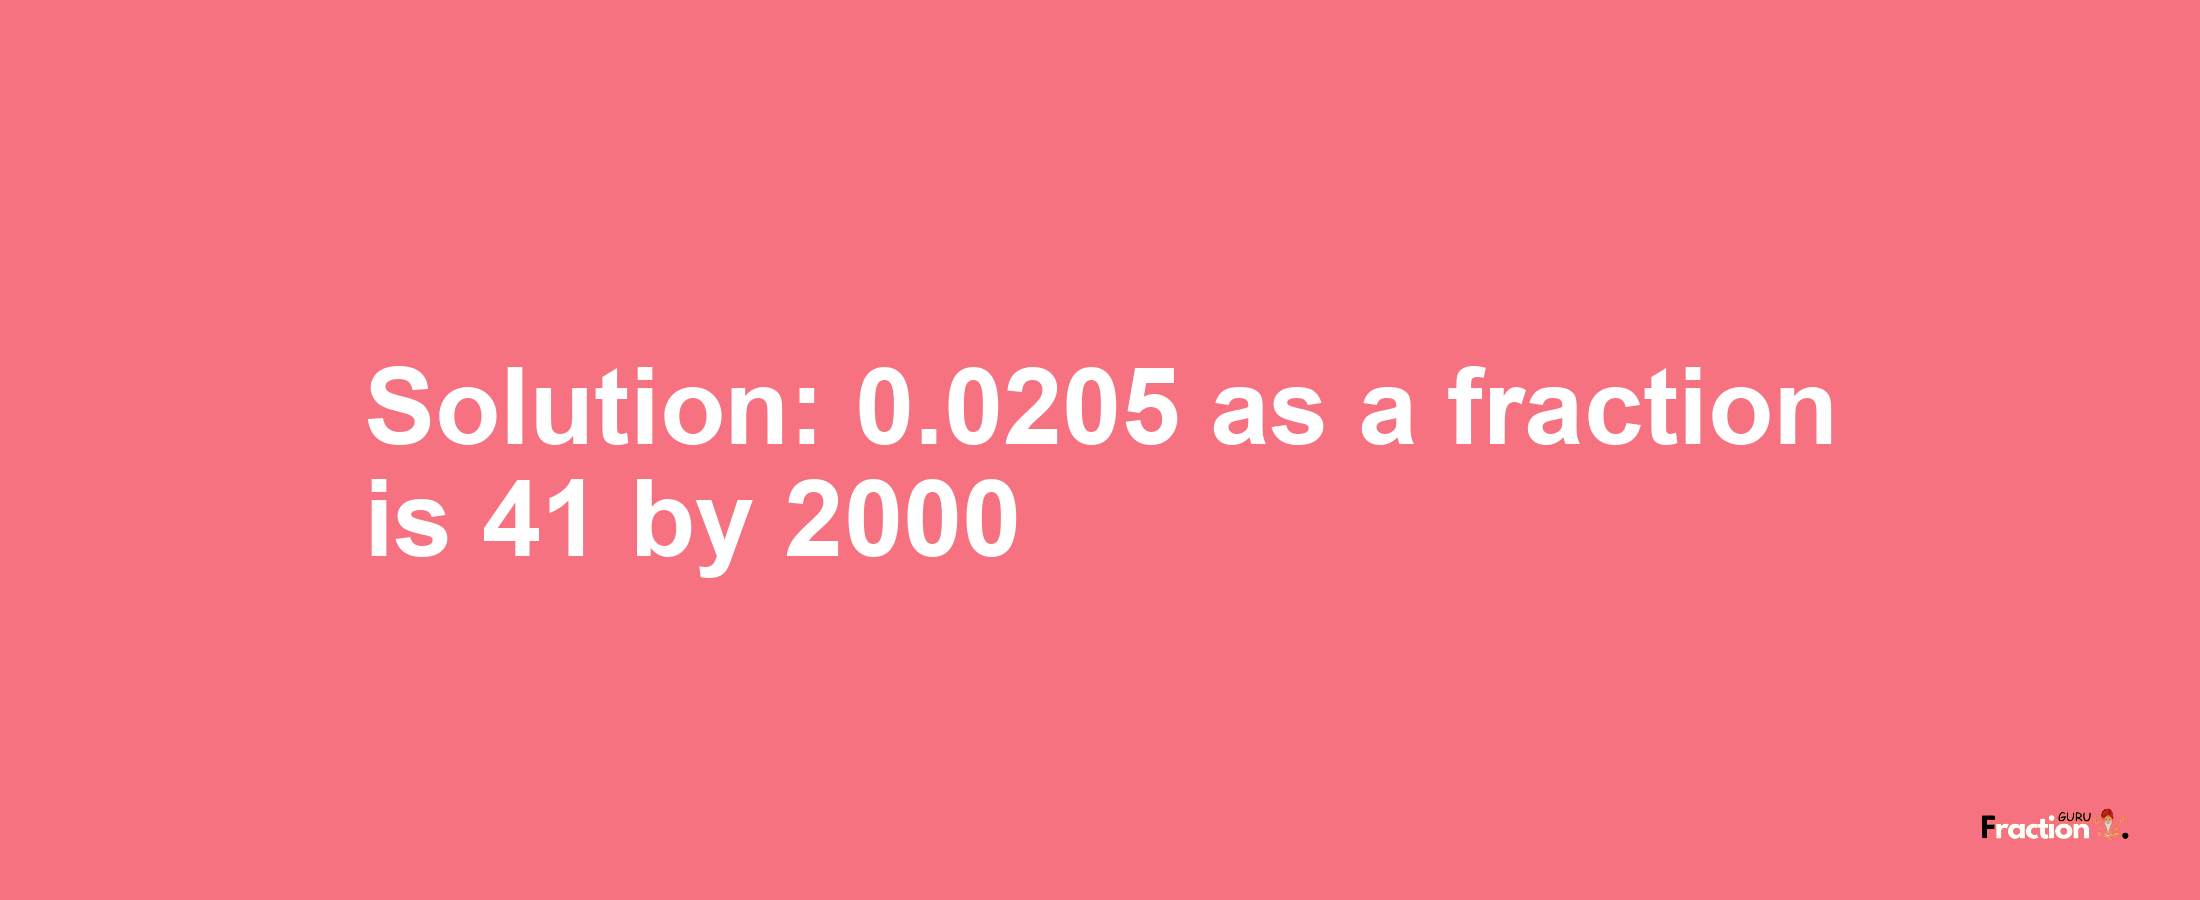 Solution:0.0205 as a fraction is 41/2000